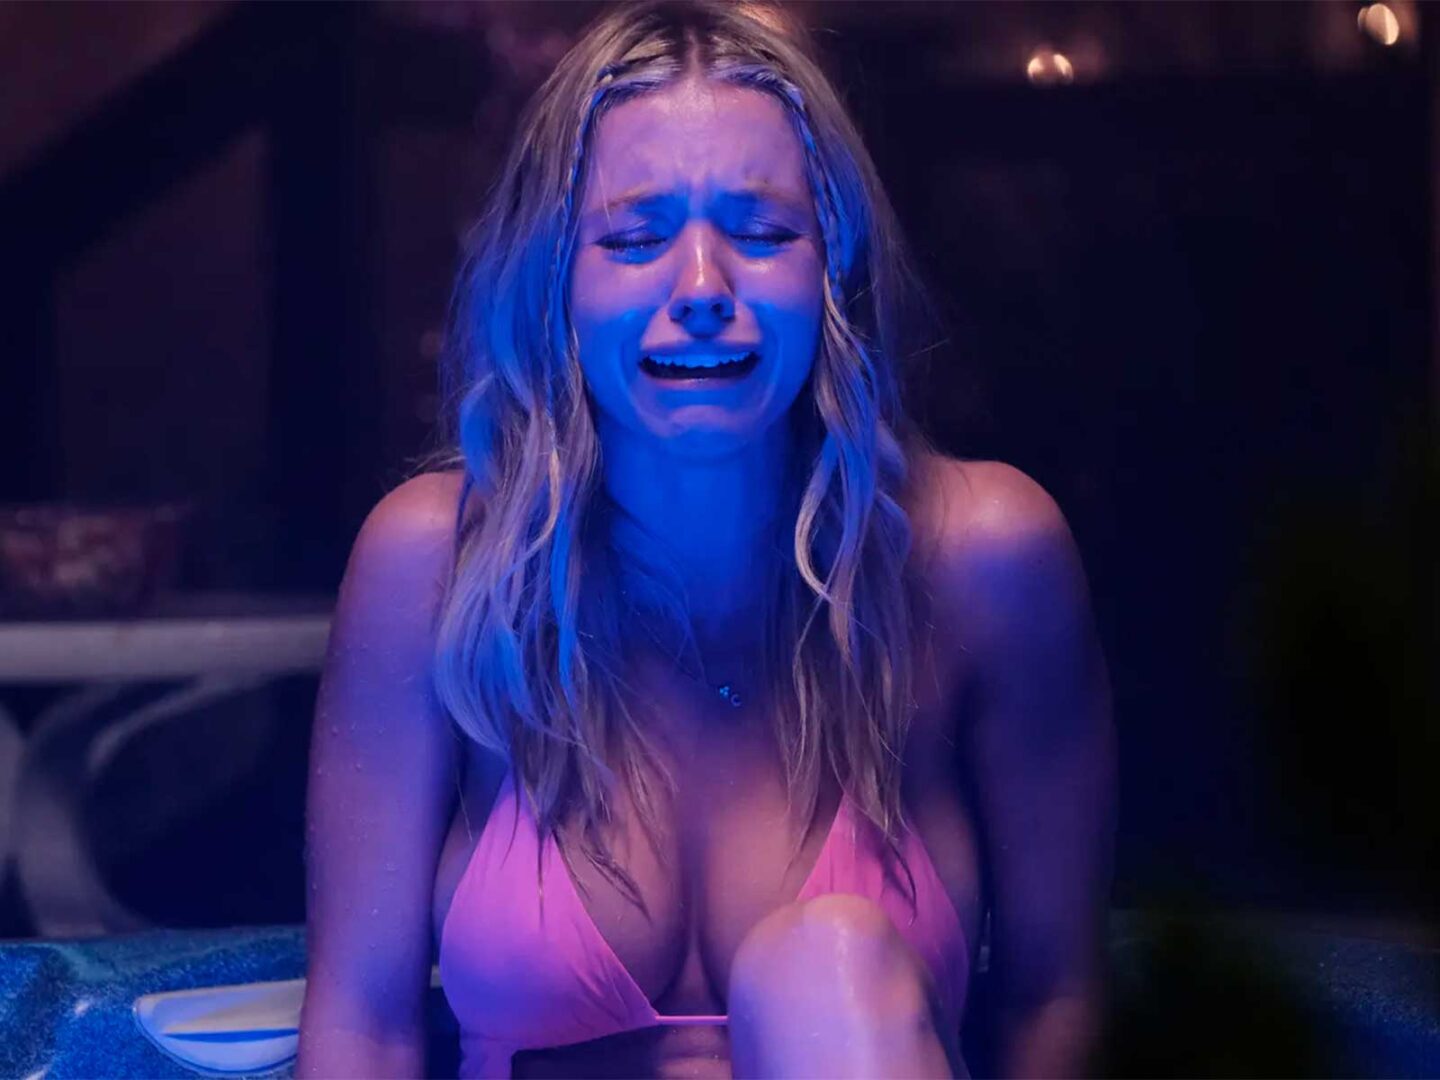 Sydney Sweeney recalls the most “disgusting” scene she filmed for ‘Euphoria’